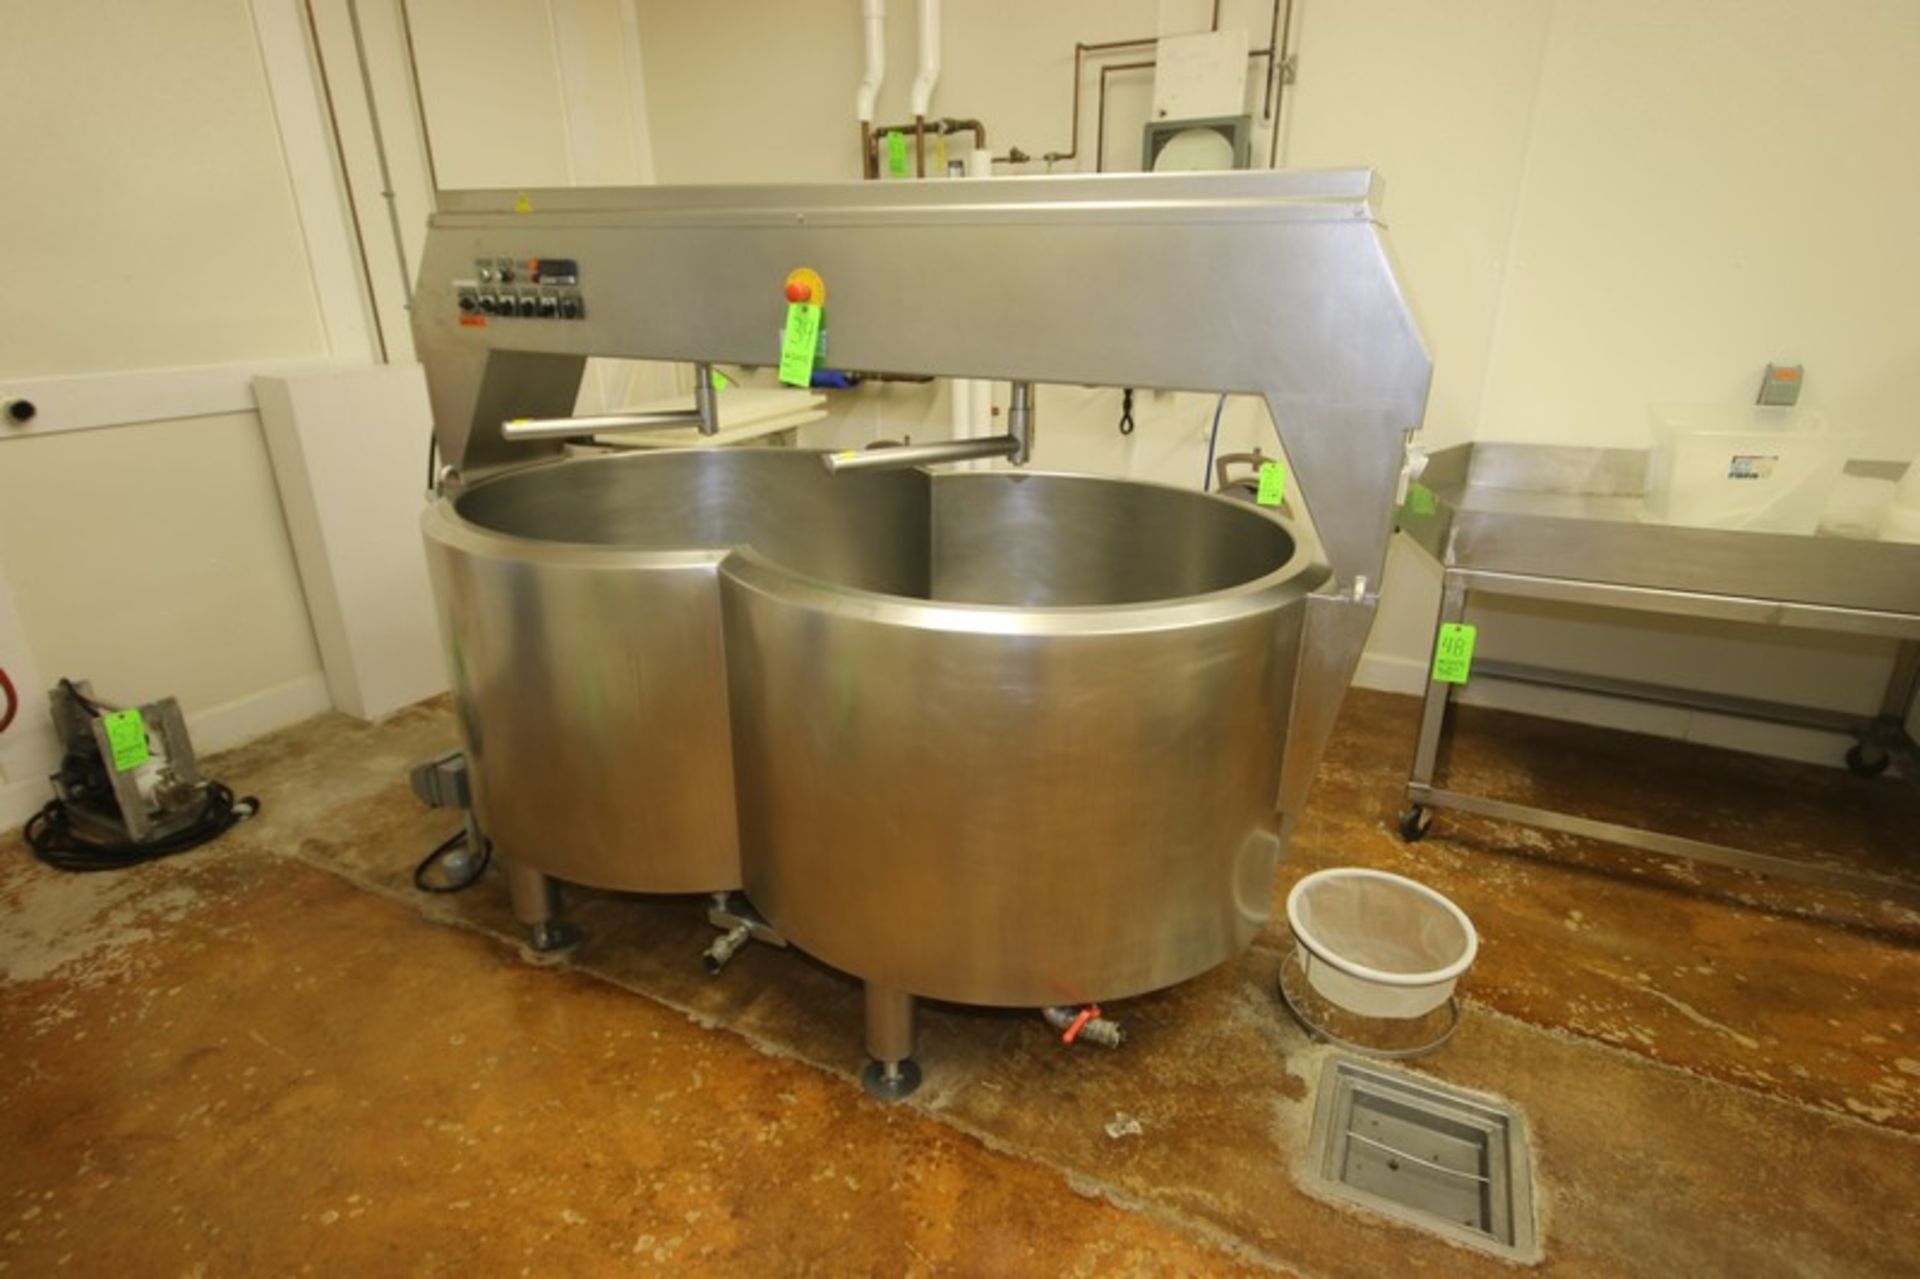 CVR 290 Gal. Double OO Cheesevat, S/N 0708019706, Includes Pump, Overall Dims.: Aprox. 8' L x 53" - Image 2 of 13